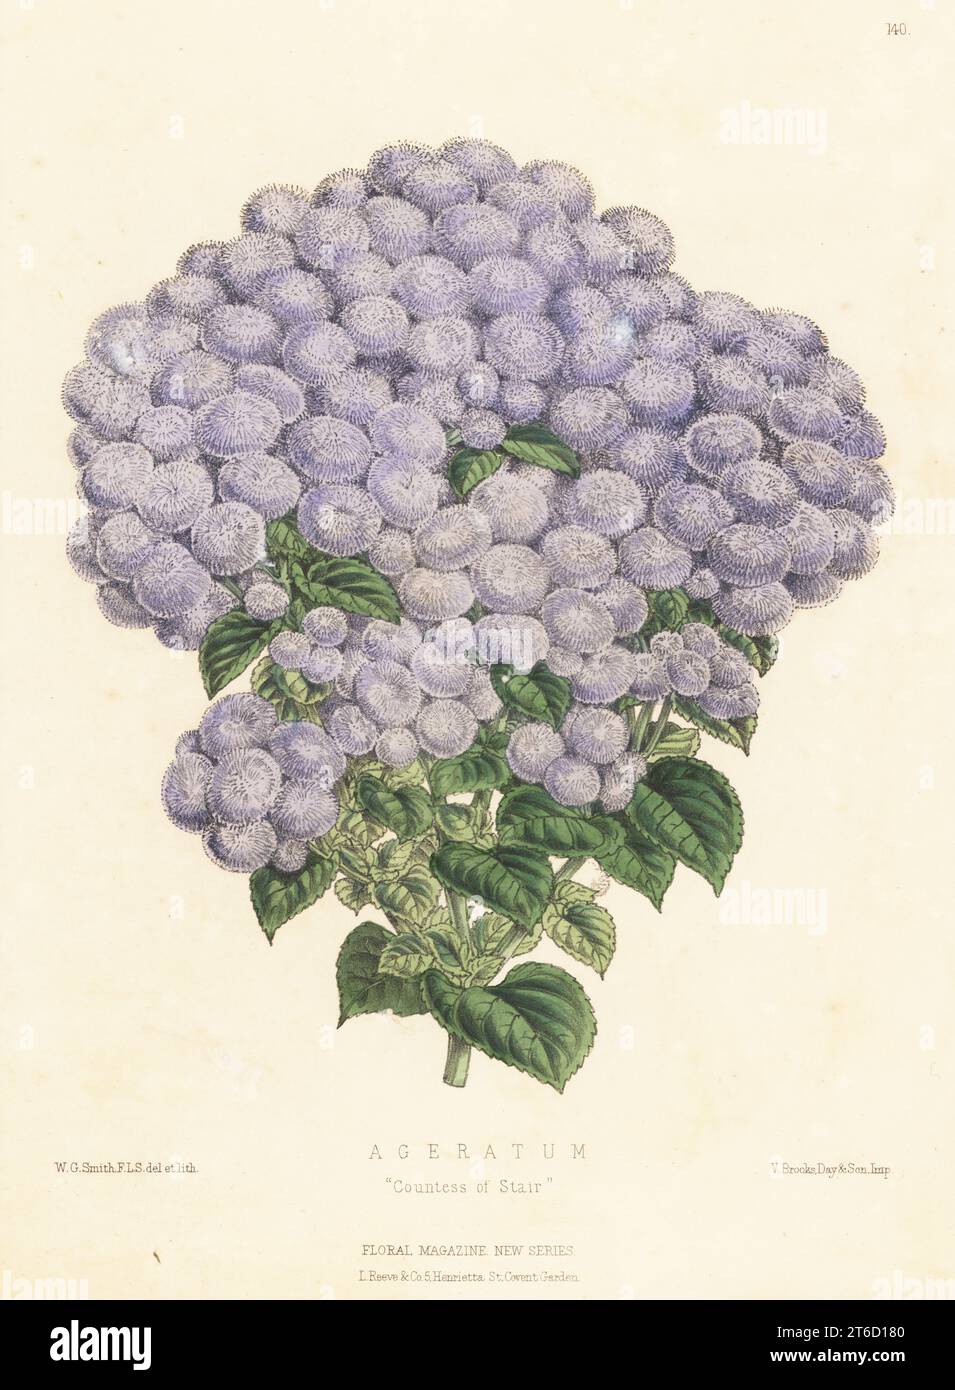 Hebeclinium macrophyllum cultivar. As Ageratum, Countess of Stair. Hybrid raised at Castle Kennedy and sold by B. S. Williams, Victoria and Paradise Nurseries, Holloway Road. Handcolored botanical illustration drawn and lithographed by Worthington George Smith from Henry Honywood Dombrain's Floral Magazine, New Series, Volume 3, L. Reeve, London, 1874. Lithograph printed by Vincent Brooks, Day & Son. Stock Photo